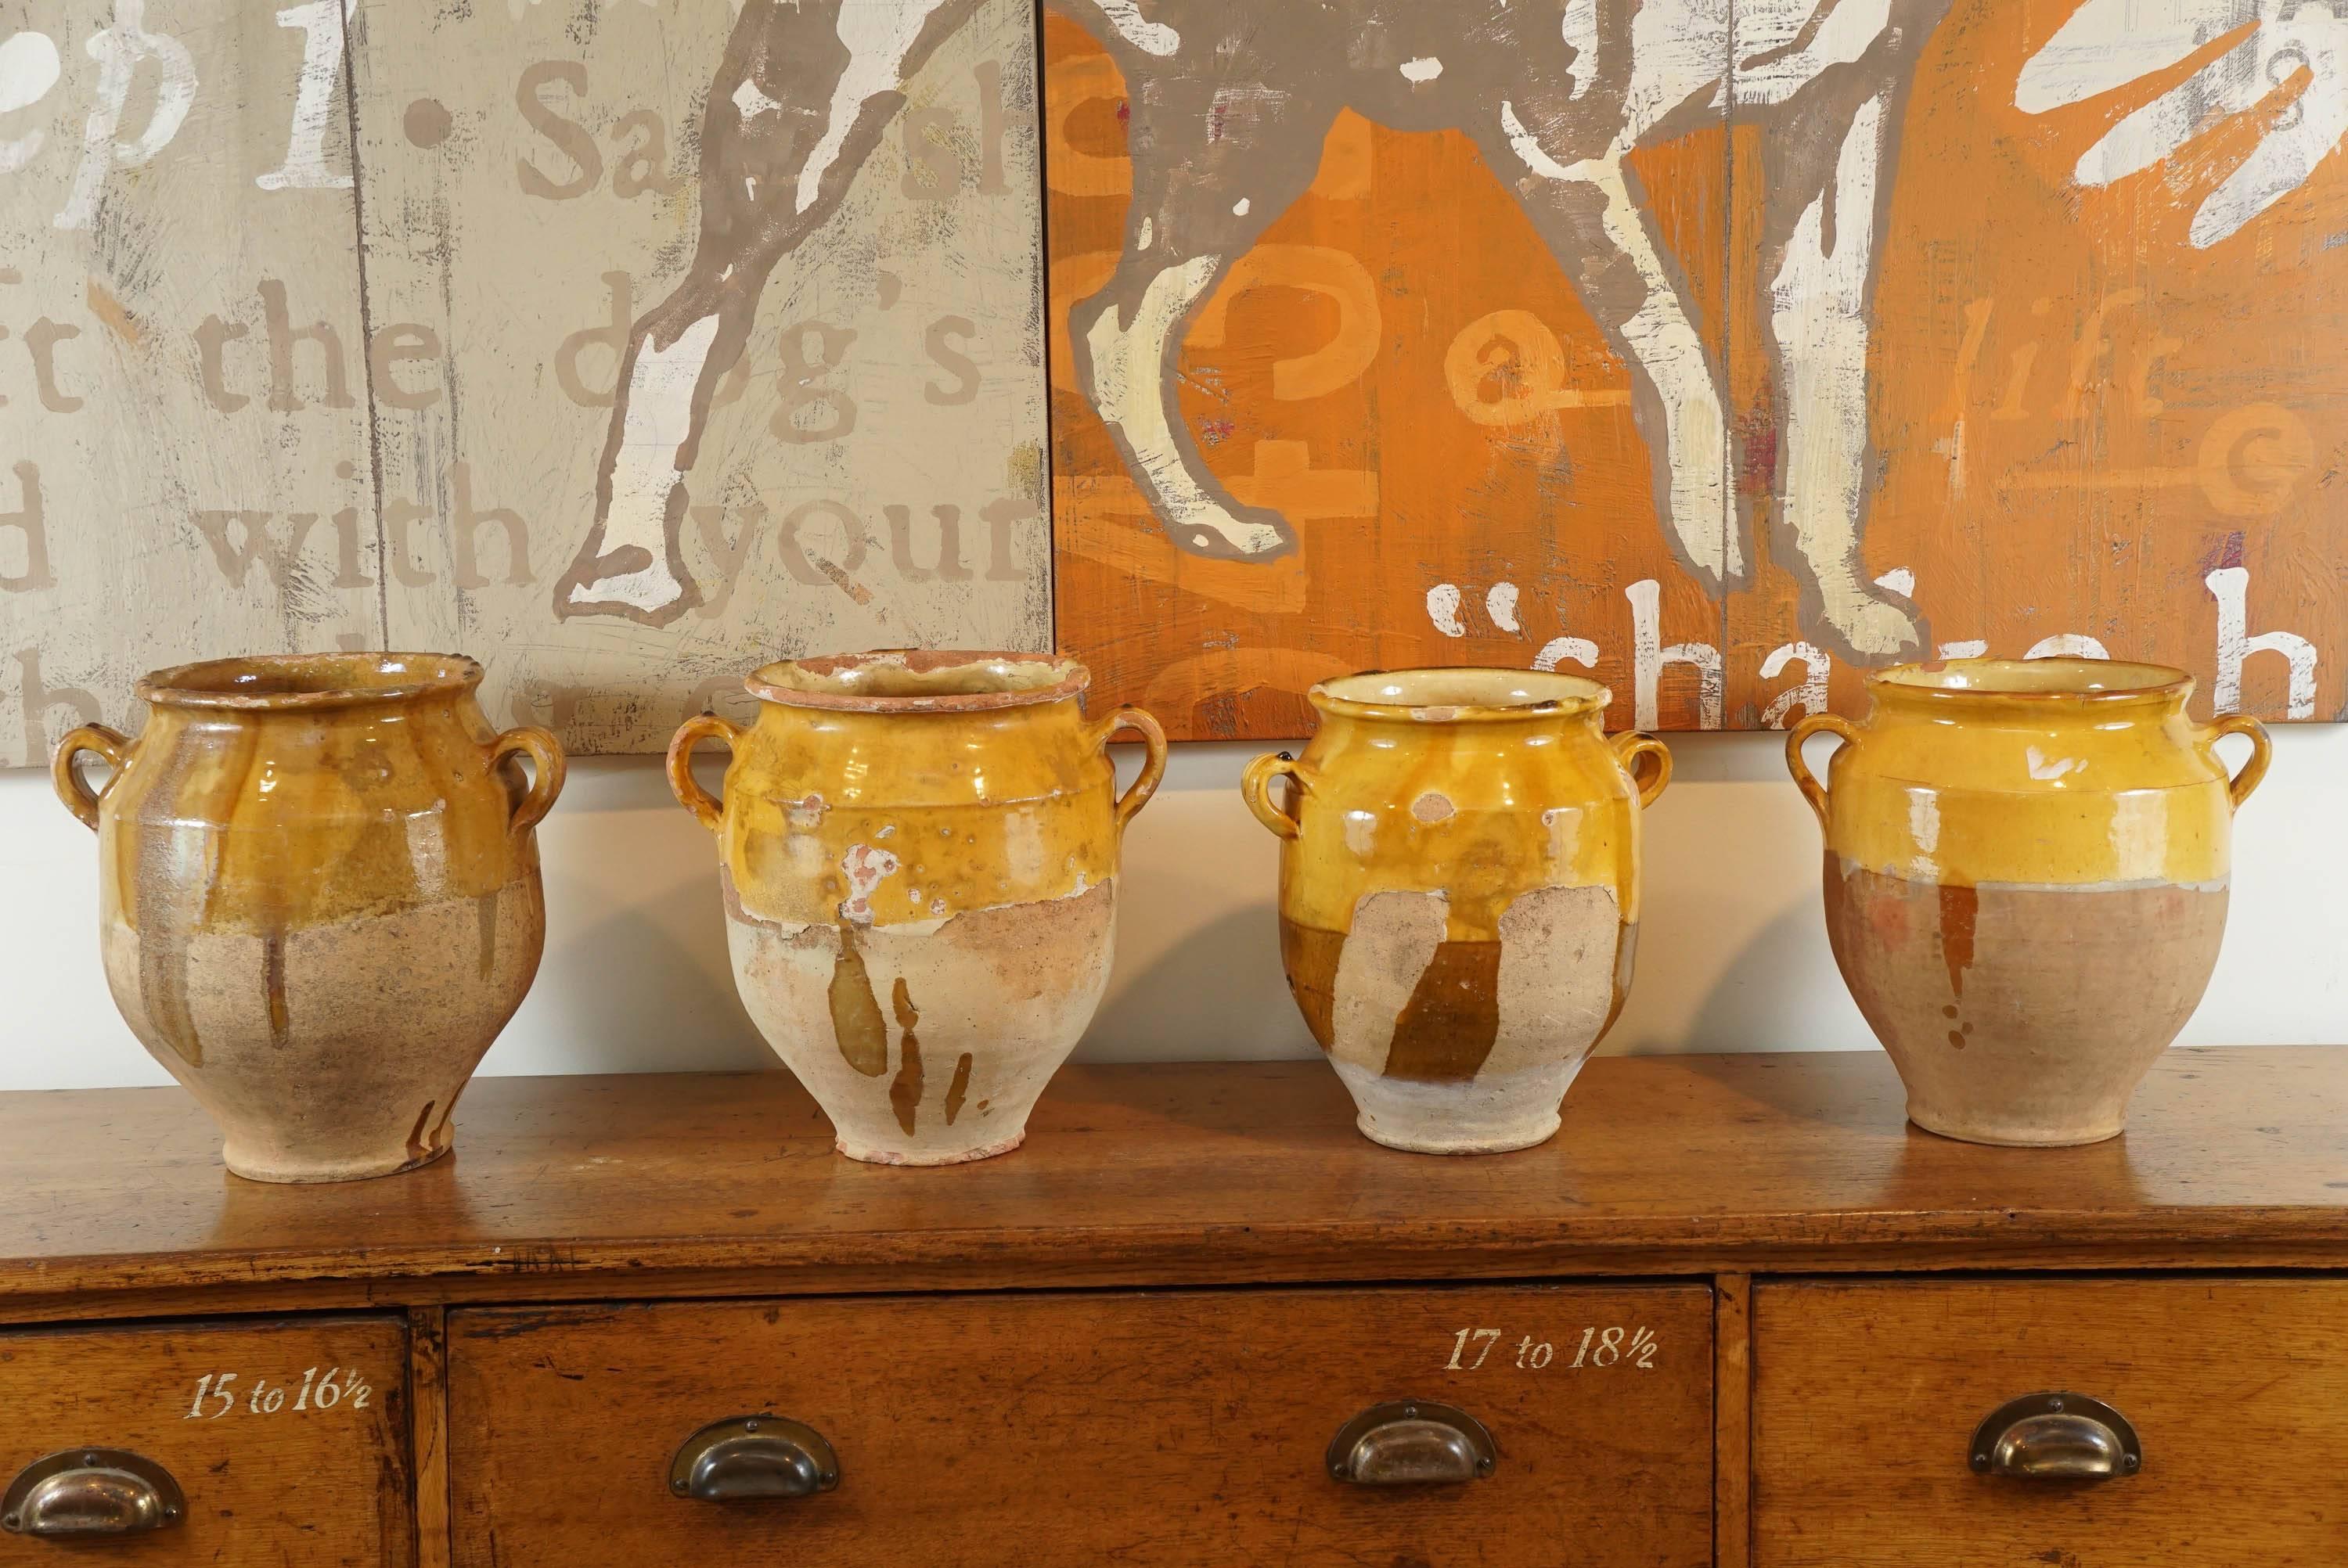 This is part of a larger collection of French confit jars. All or in a mustard glass and we prefer confit jars that have drippings as opposed to a uniform glass. These look wonderful with a glass vase inside and fresh flowers or dried flowers. We